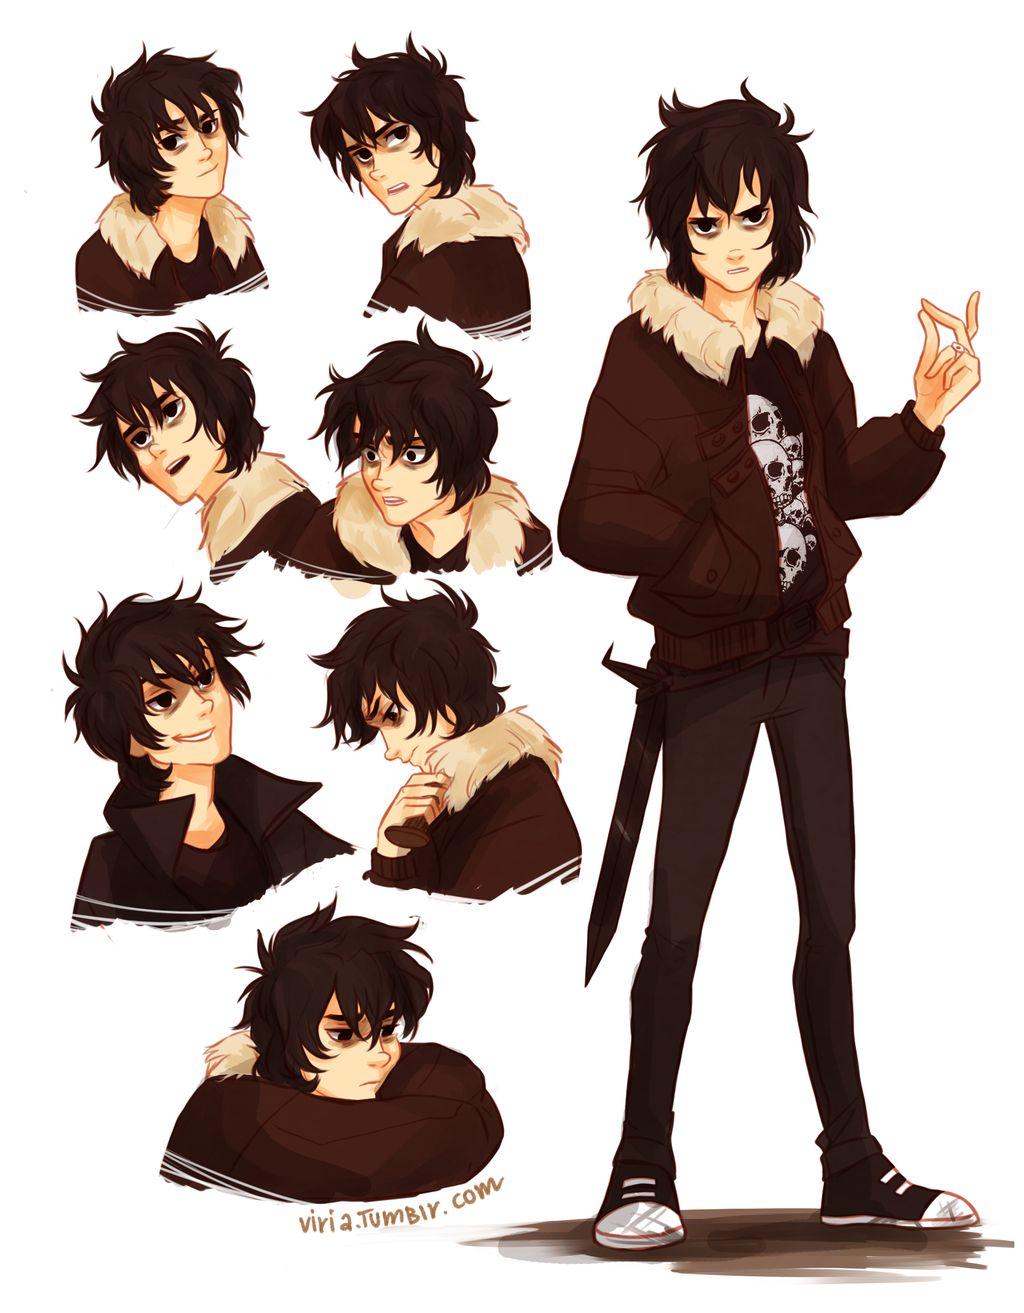 Nico diAngelo.have I pinned this already? whoever this artist is